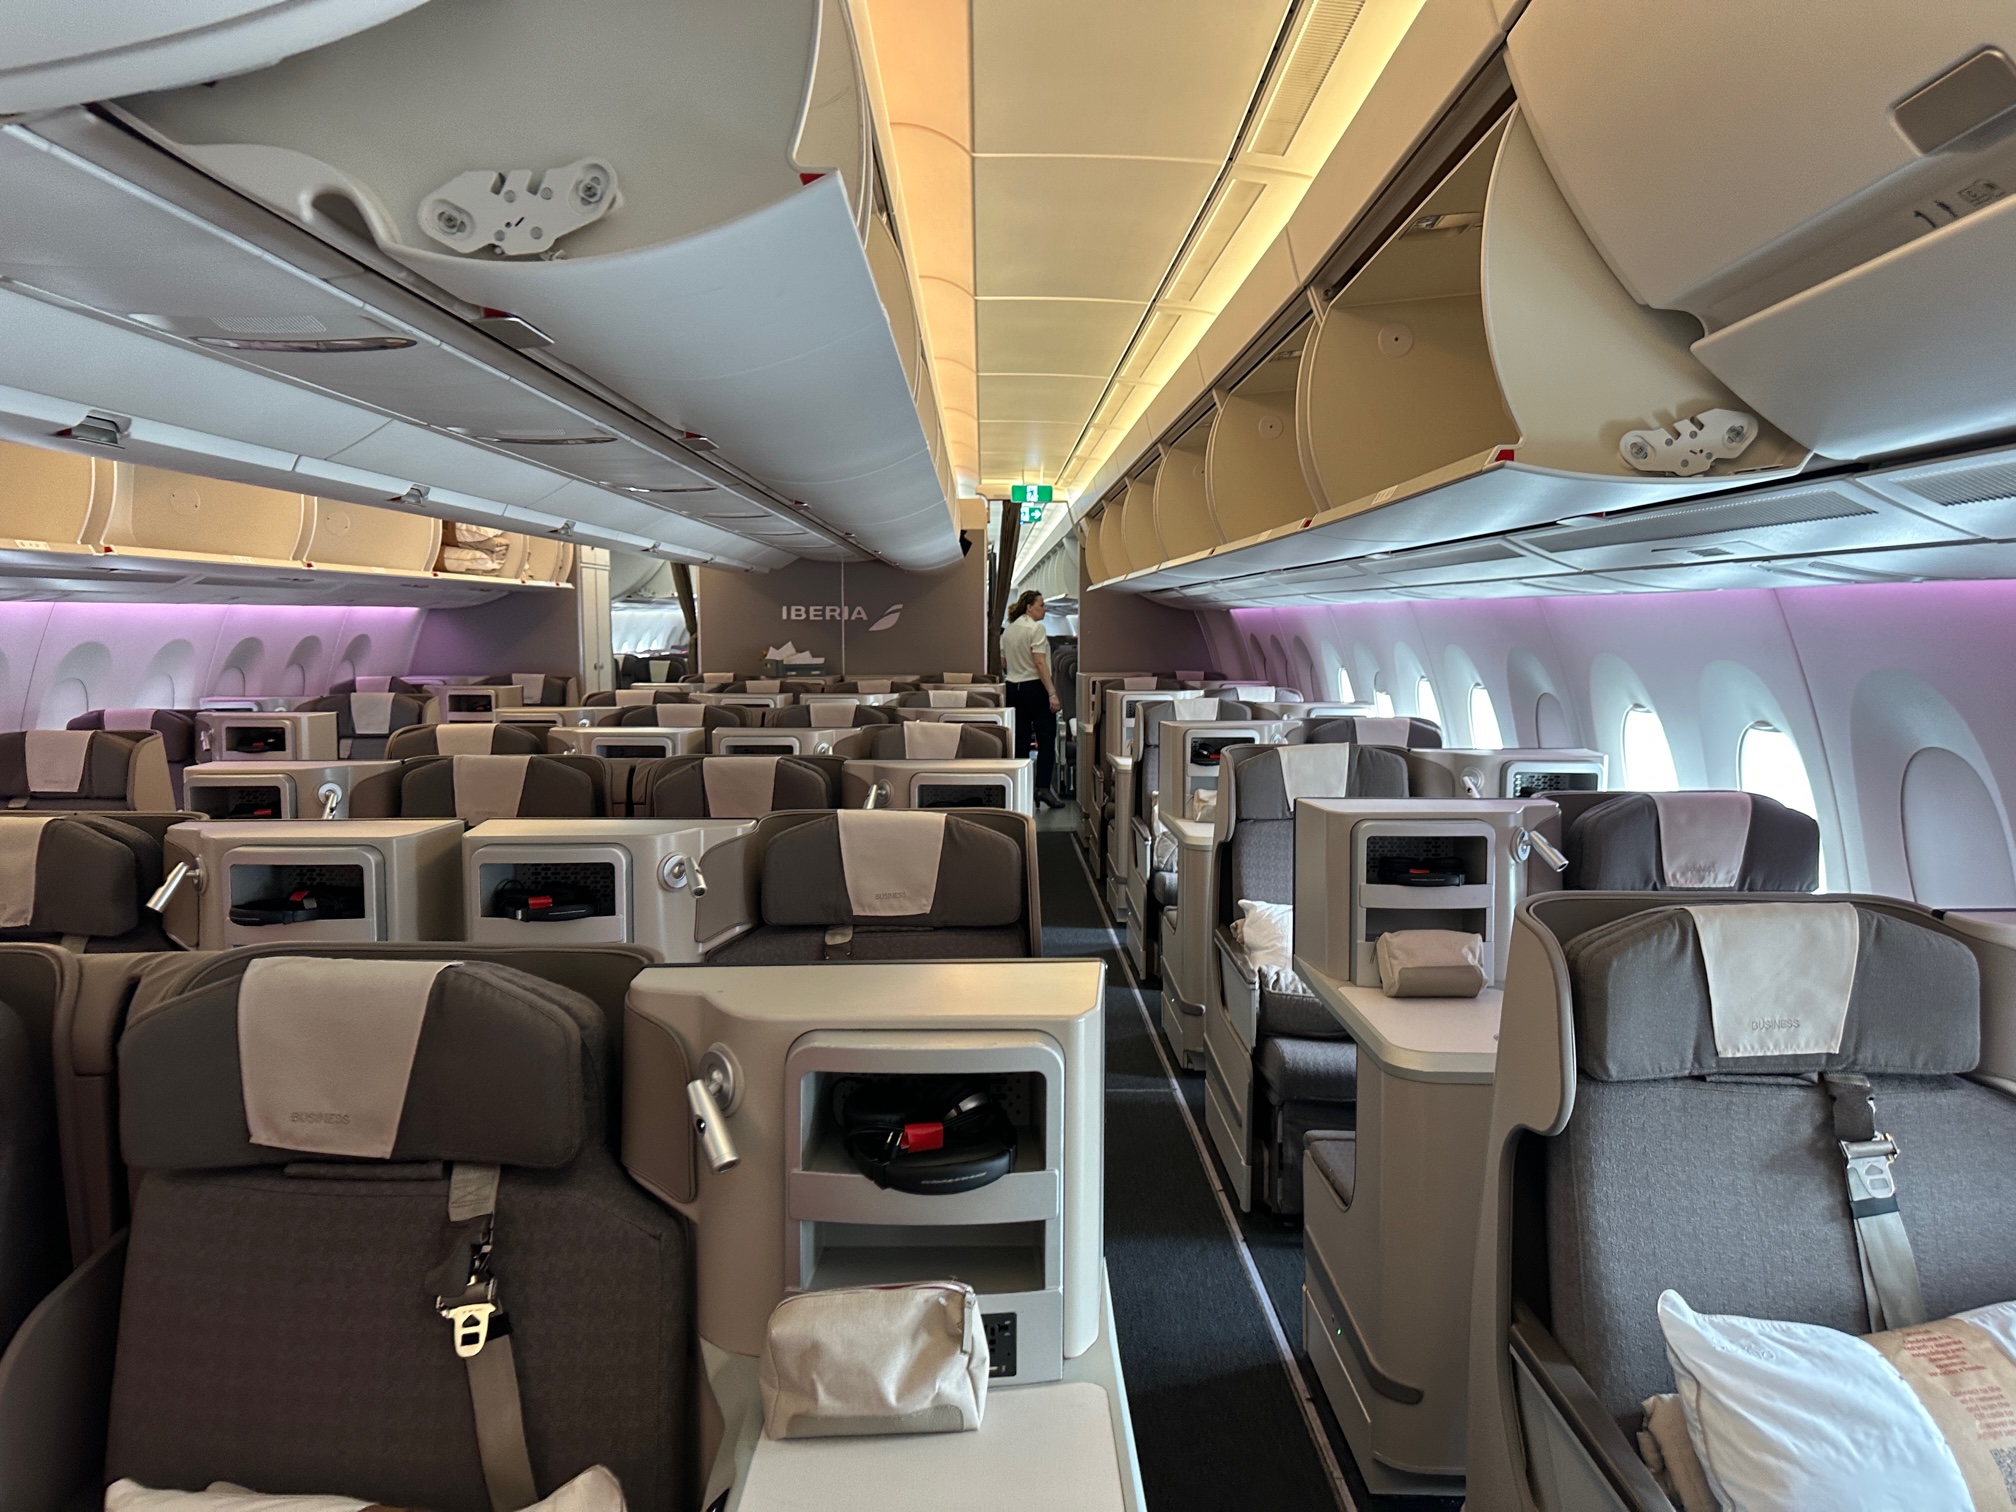 Business class area on airplane